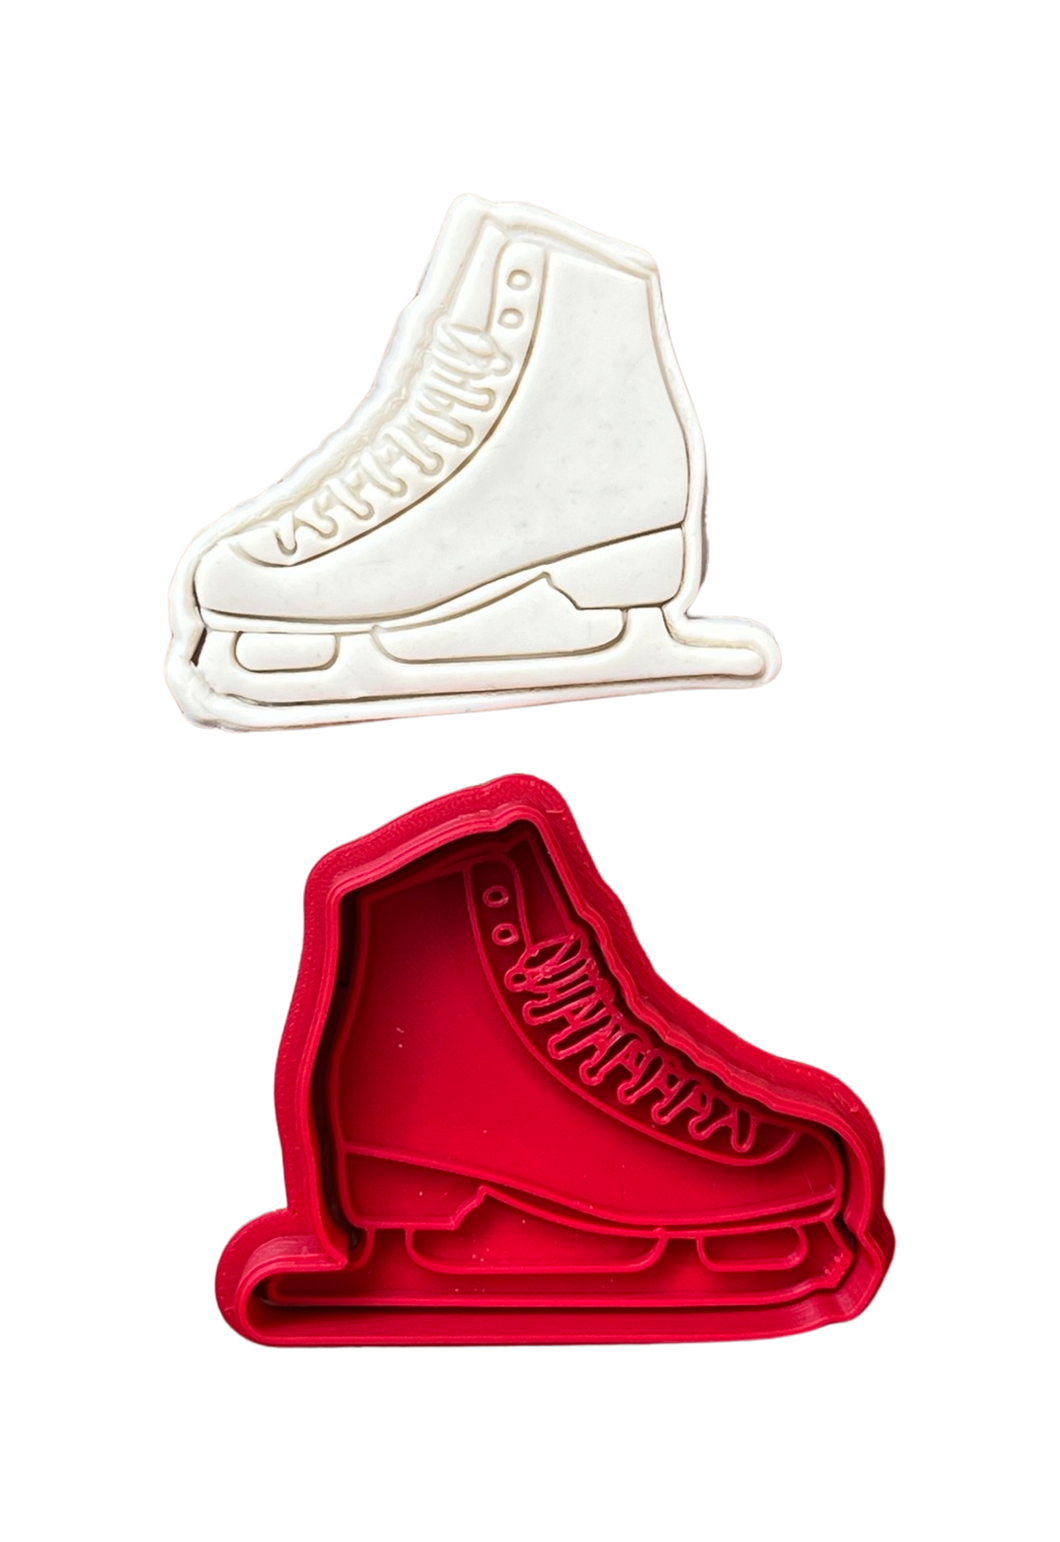 Ice skating shoes cookie cutter stamp Teen birthday